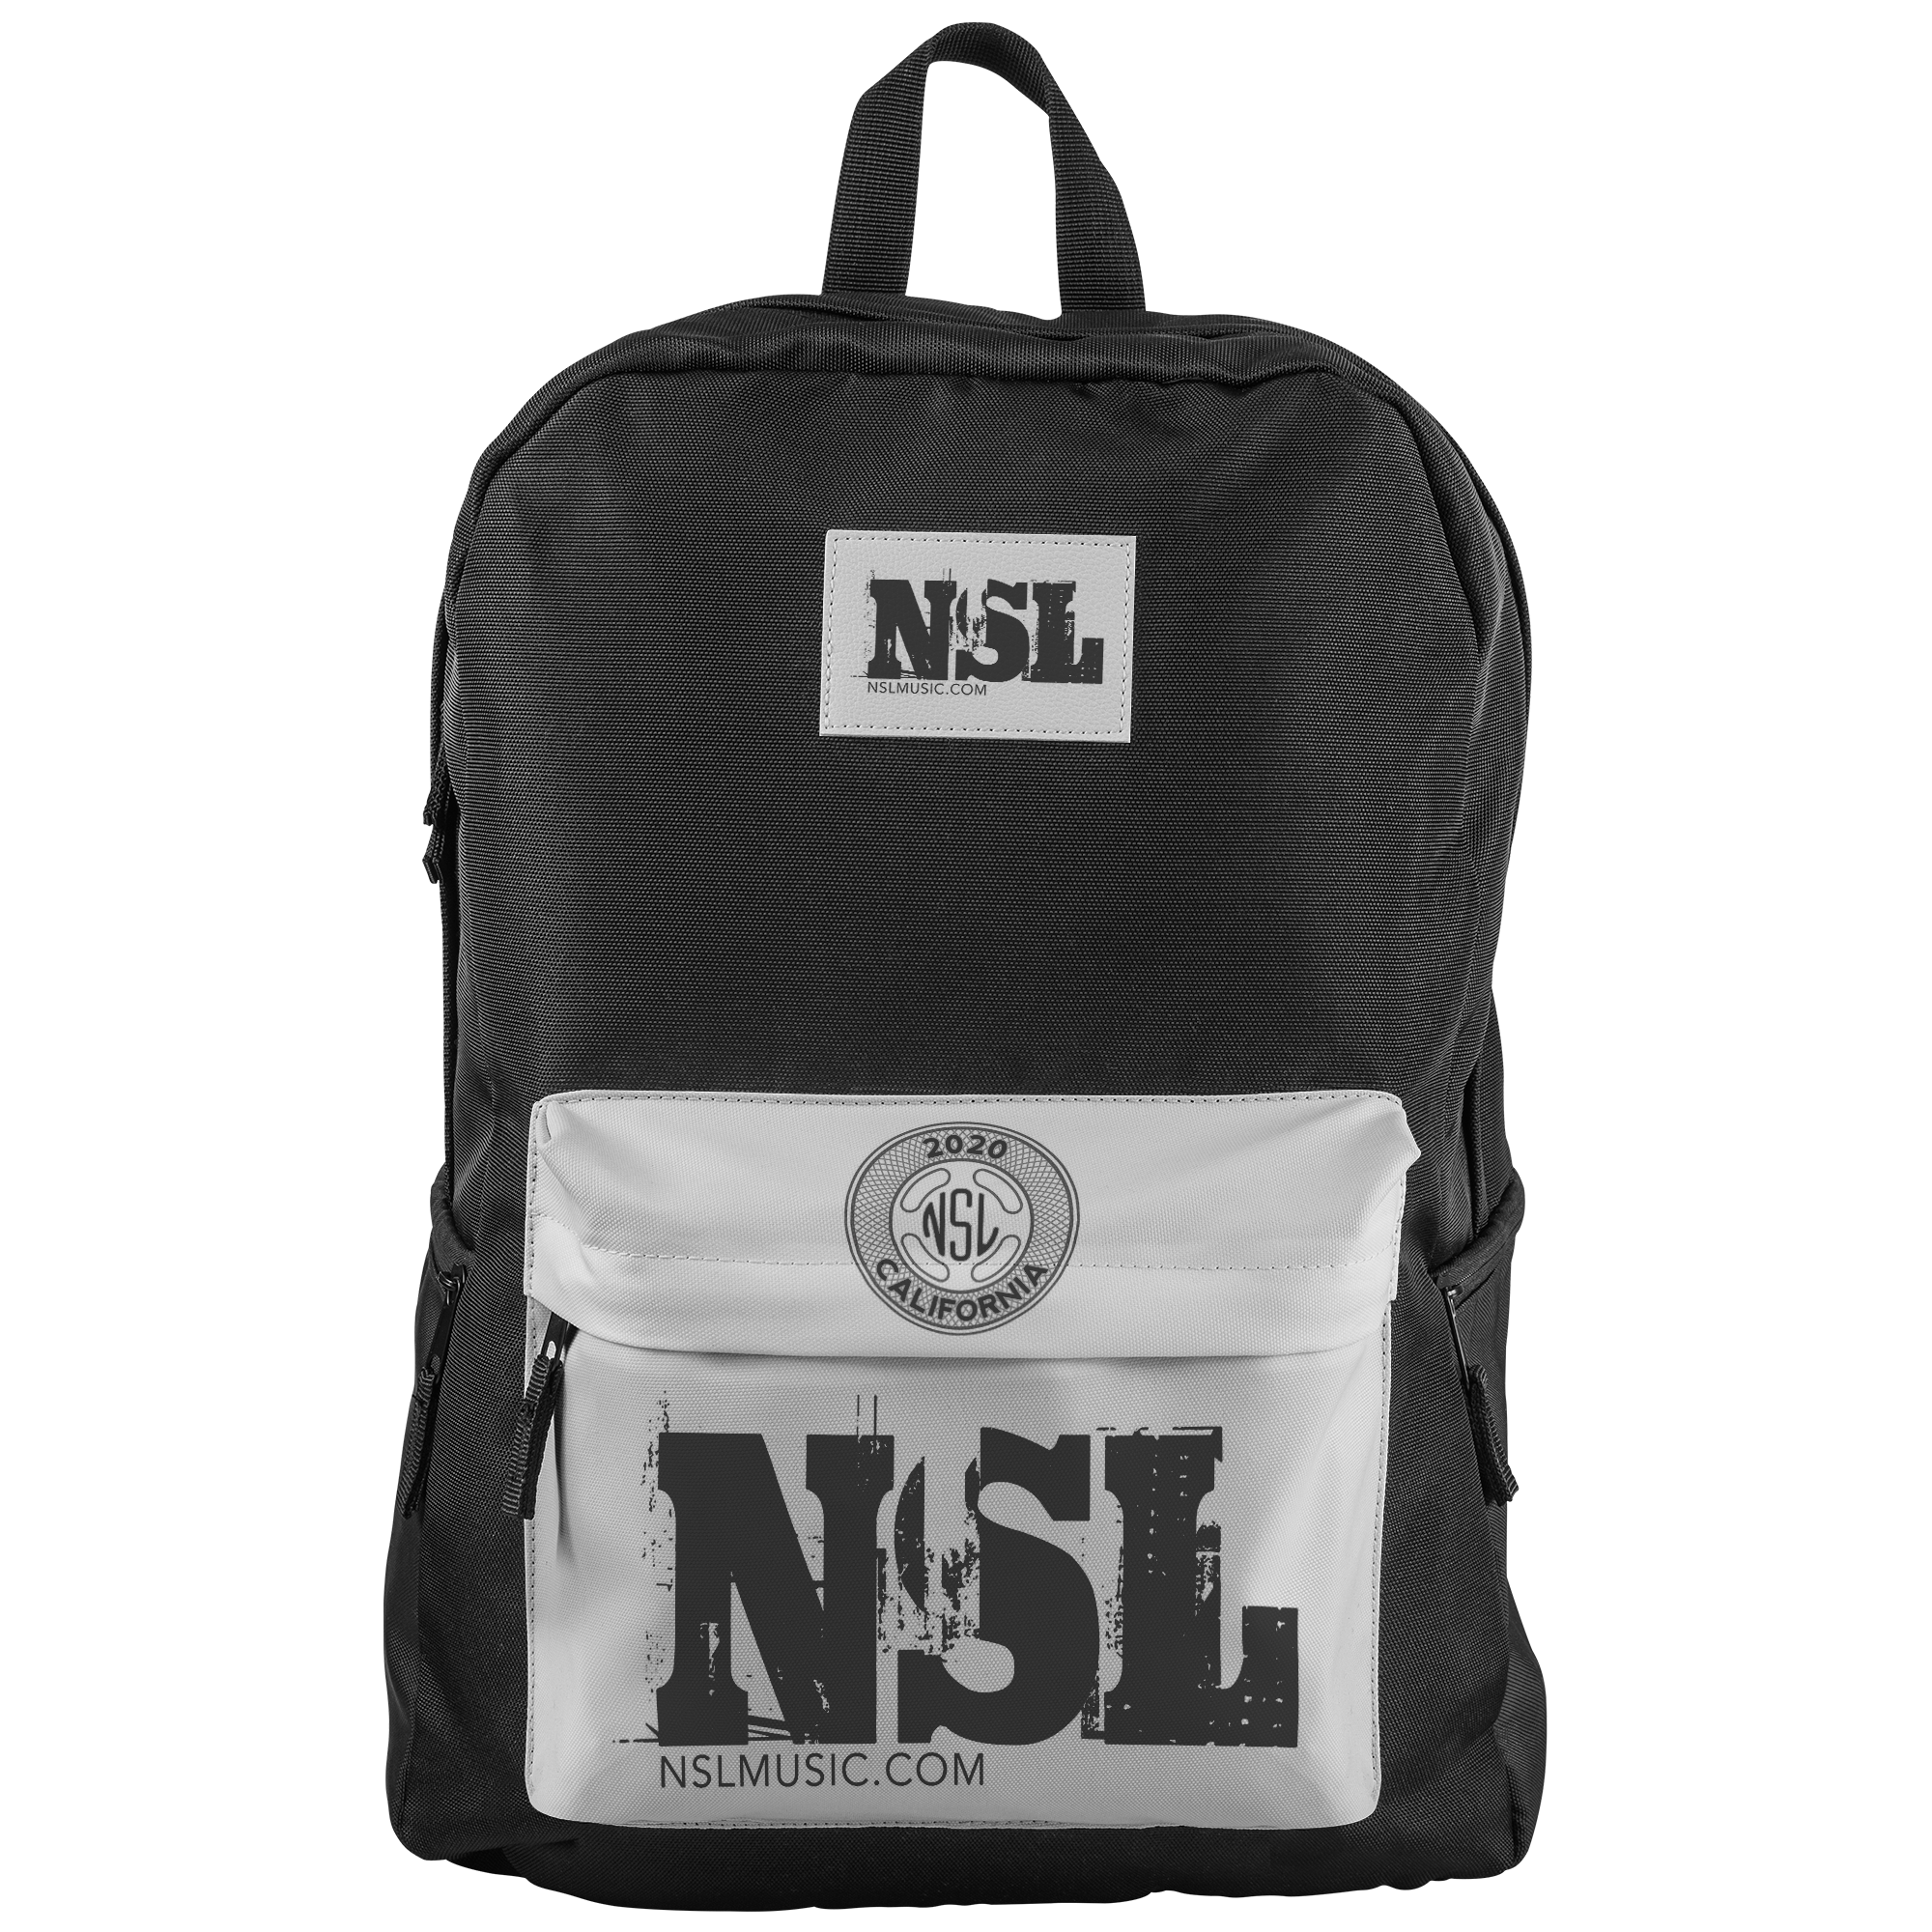 NSL DAY-TRIPPER BACKPACK